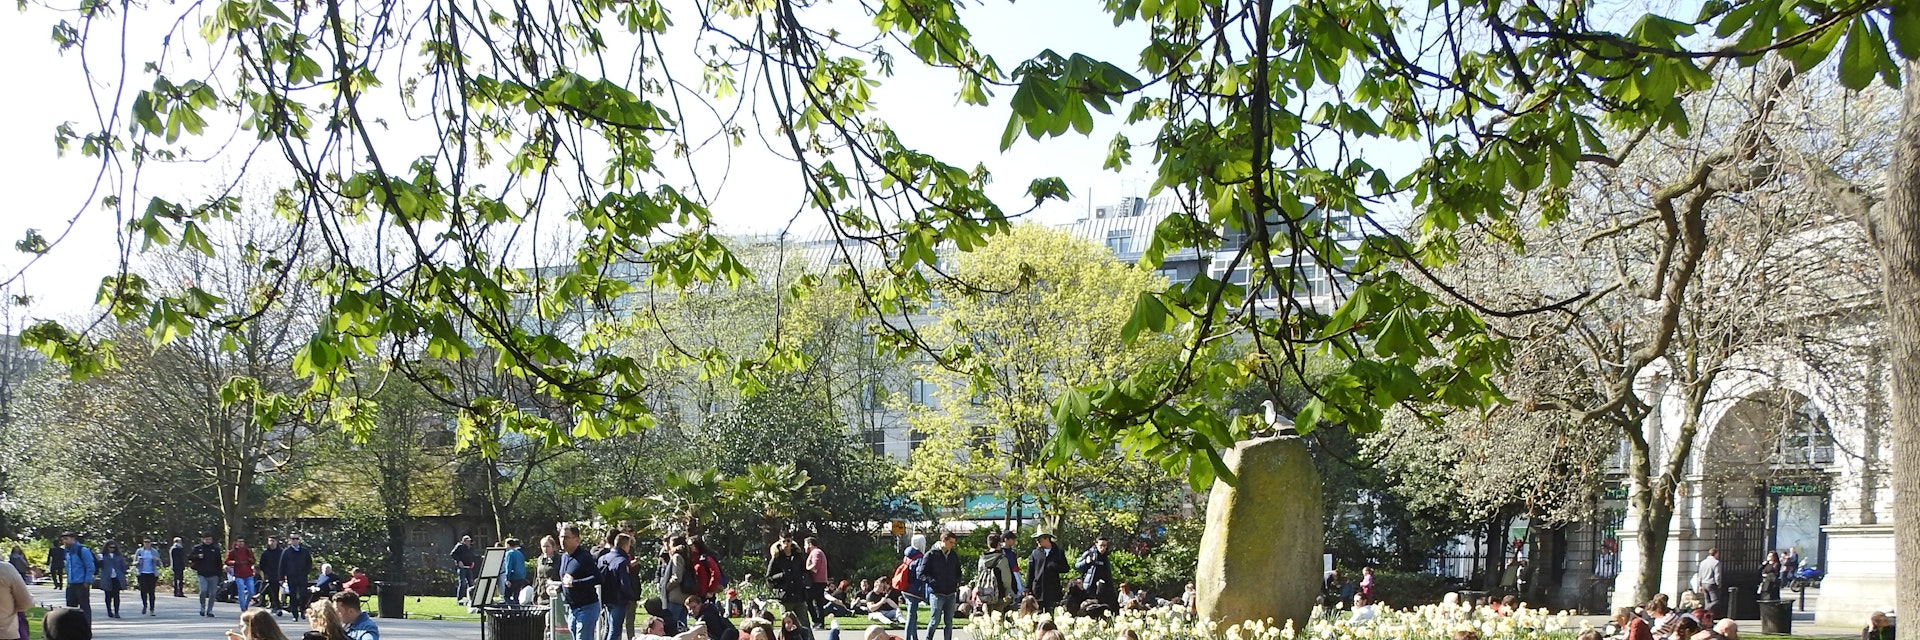 March 29, 2019: Crowd of people sitting on the grass in St Stephen's Green city centre public park on a hot sunny day.